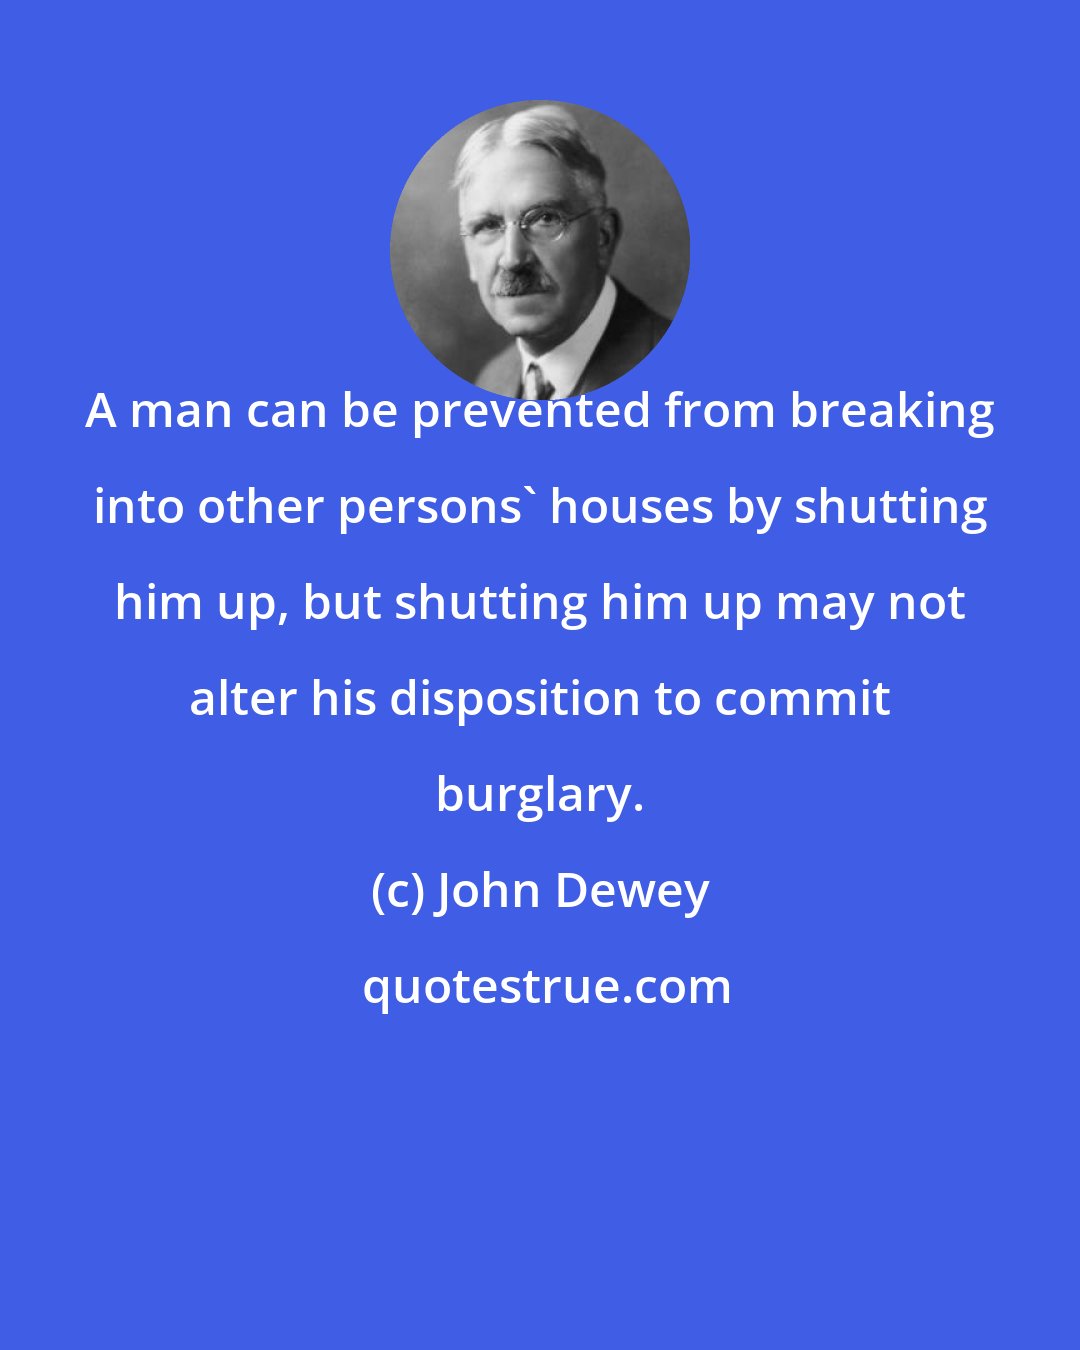 John Dewey: A man can be prevented from breaking into other persons' houses by shutting him up, but shutting him up may not alter his disposition to commit burglary.